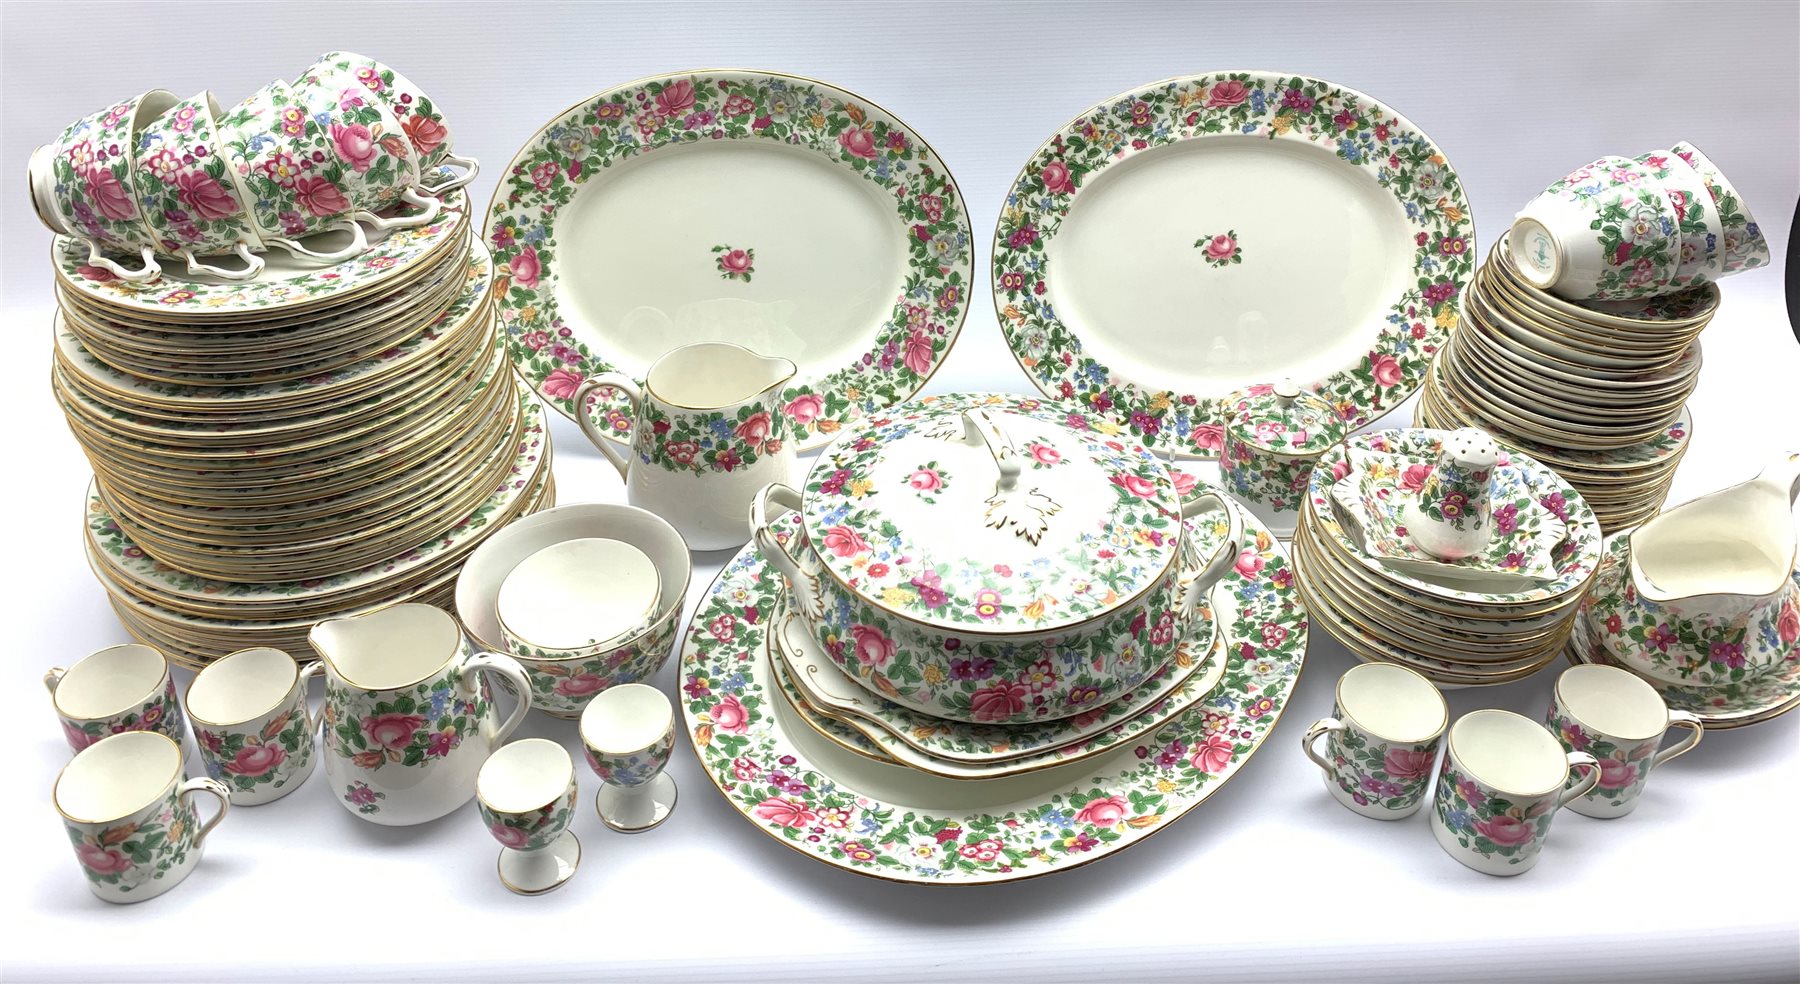 Crown Staffordshire 'Thousand Flowers' pattern dinner and part tea service